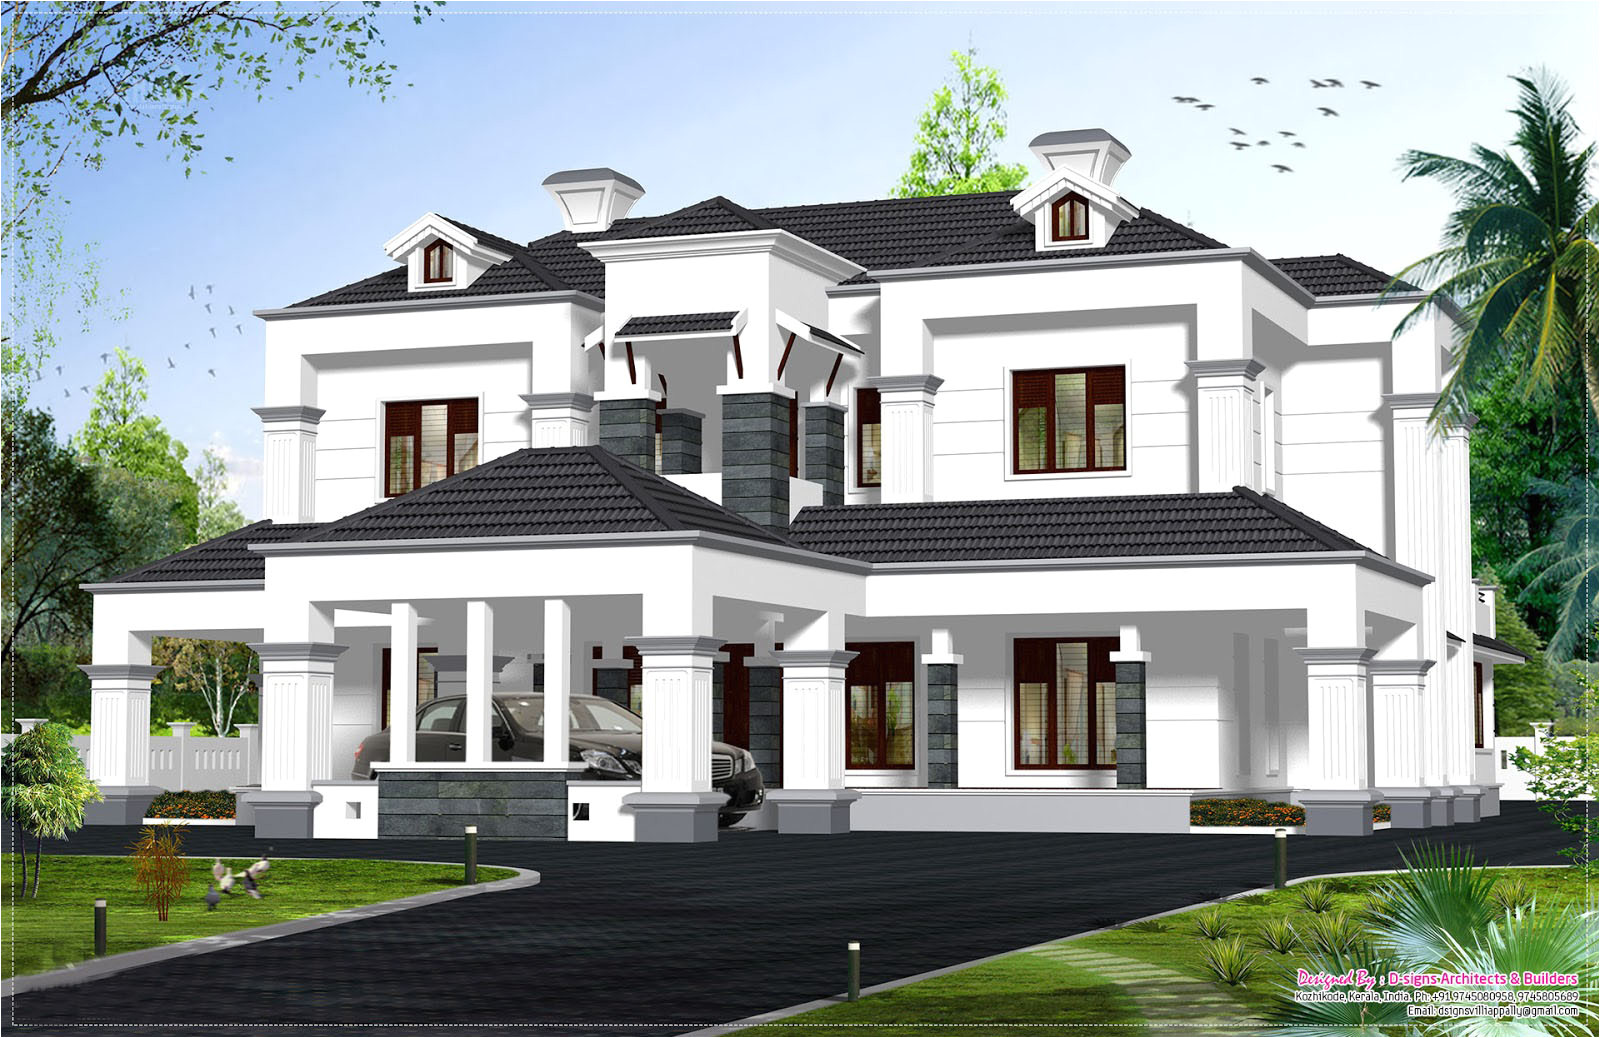 kerala house model which victorian style design